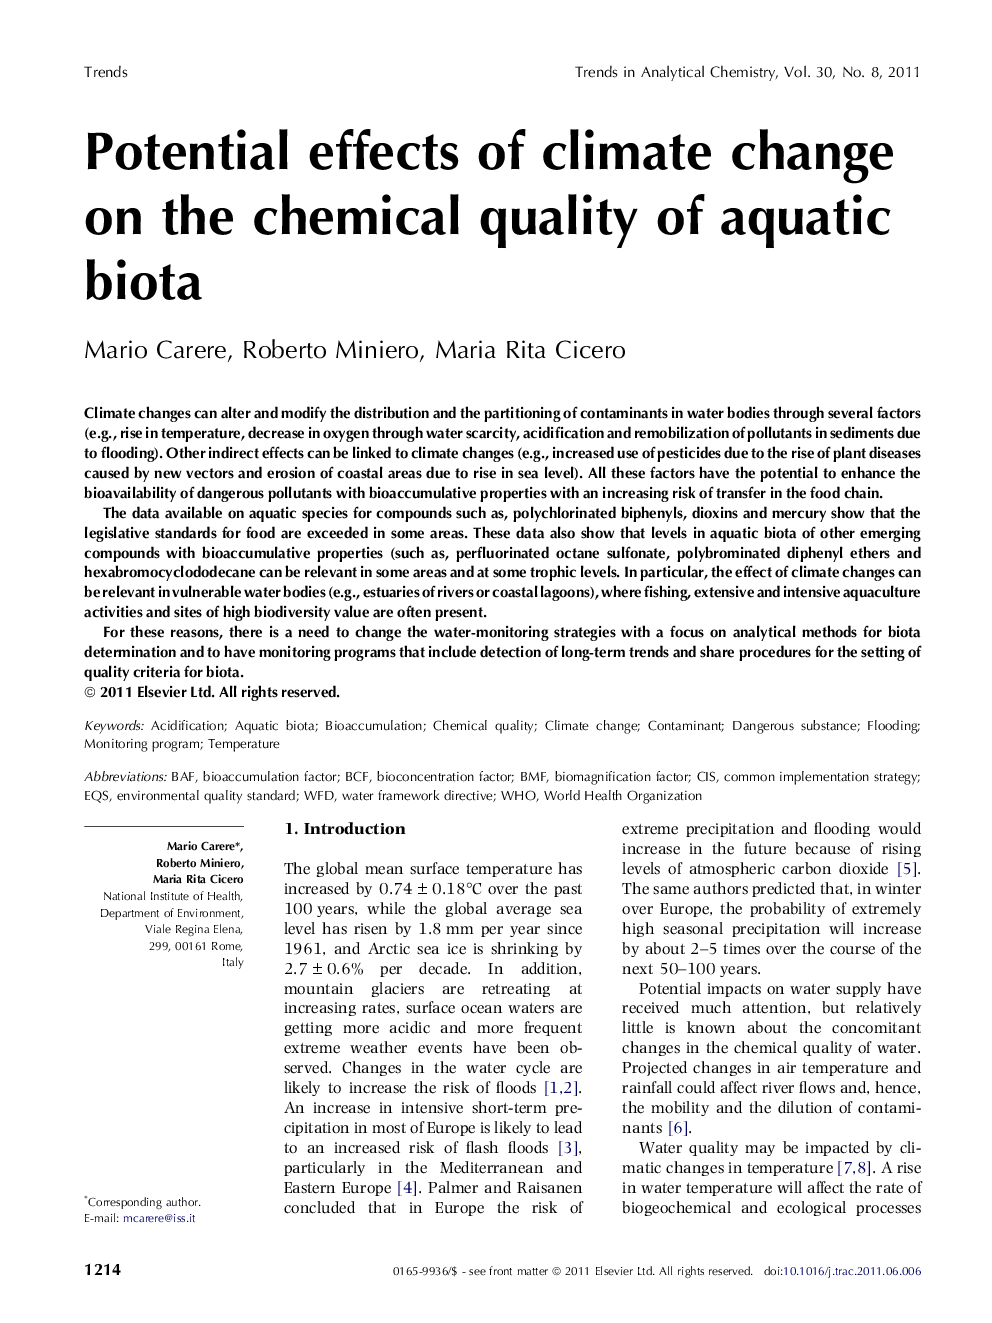 Potential effects of climate change on the chemical quality of aquatic biota